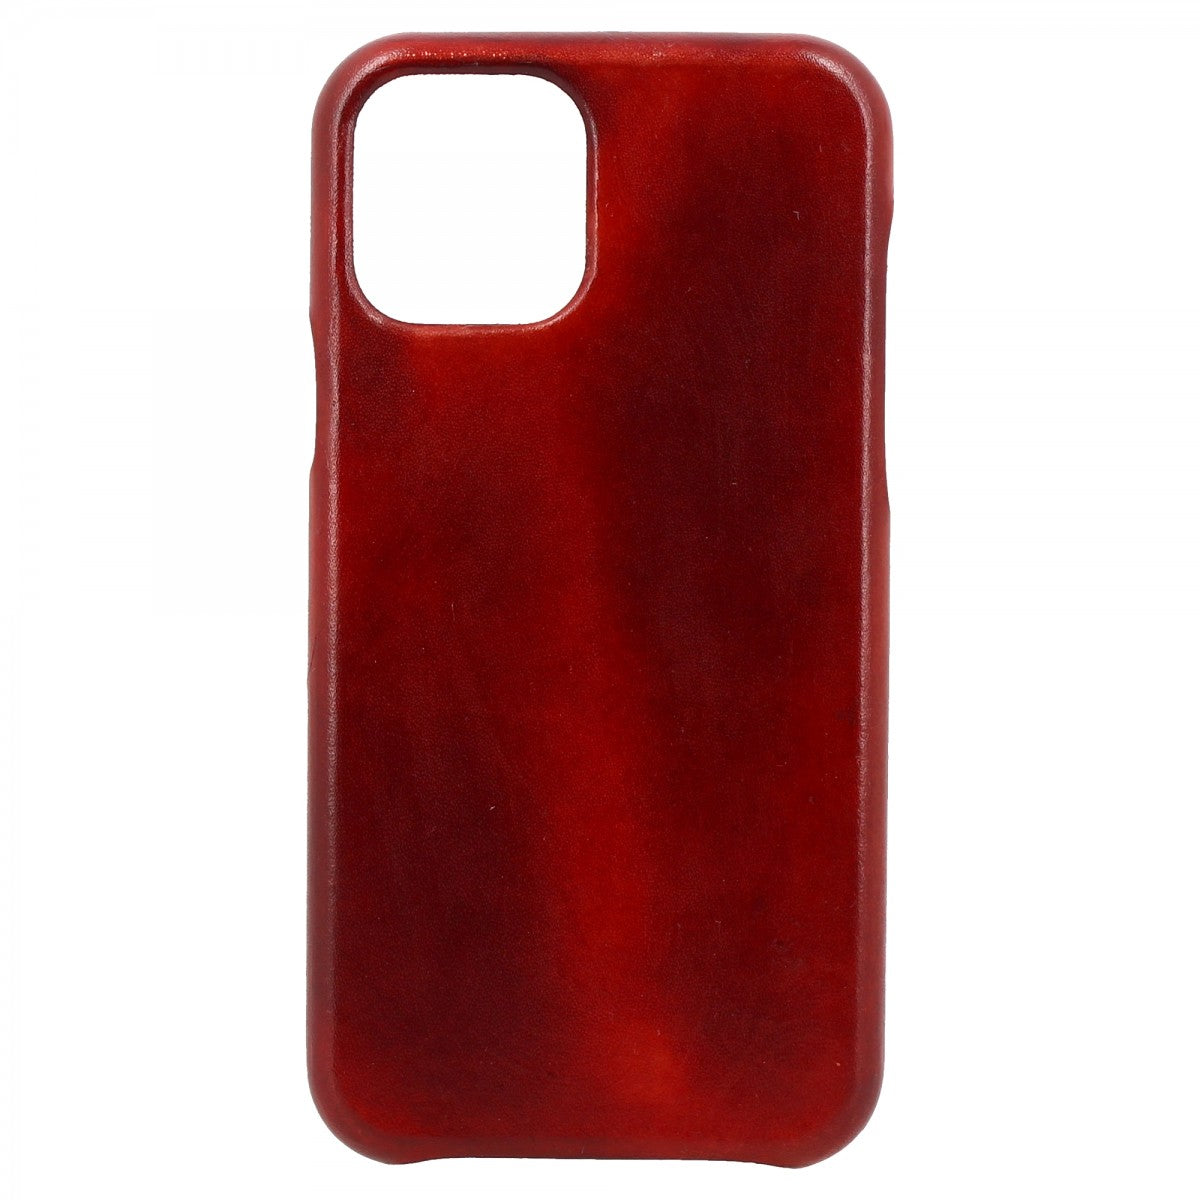 Cover iPhone in pelle rossa tamponata a mano